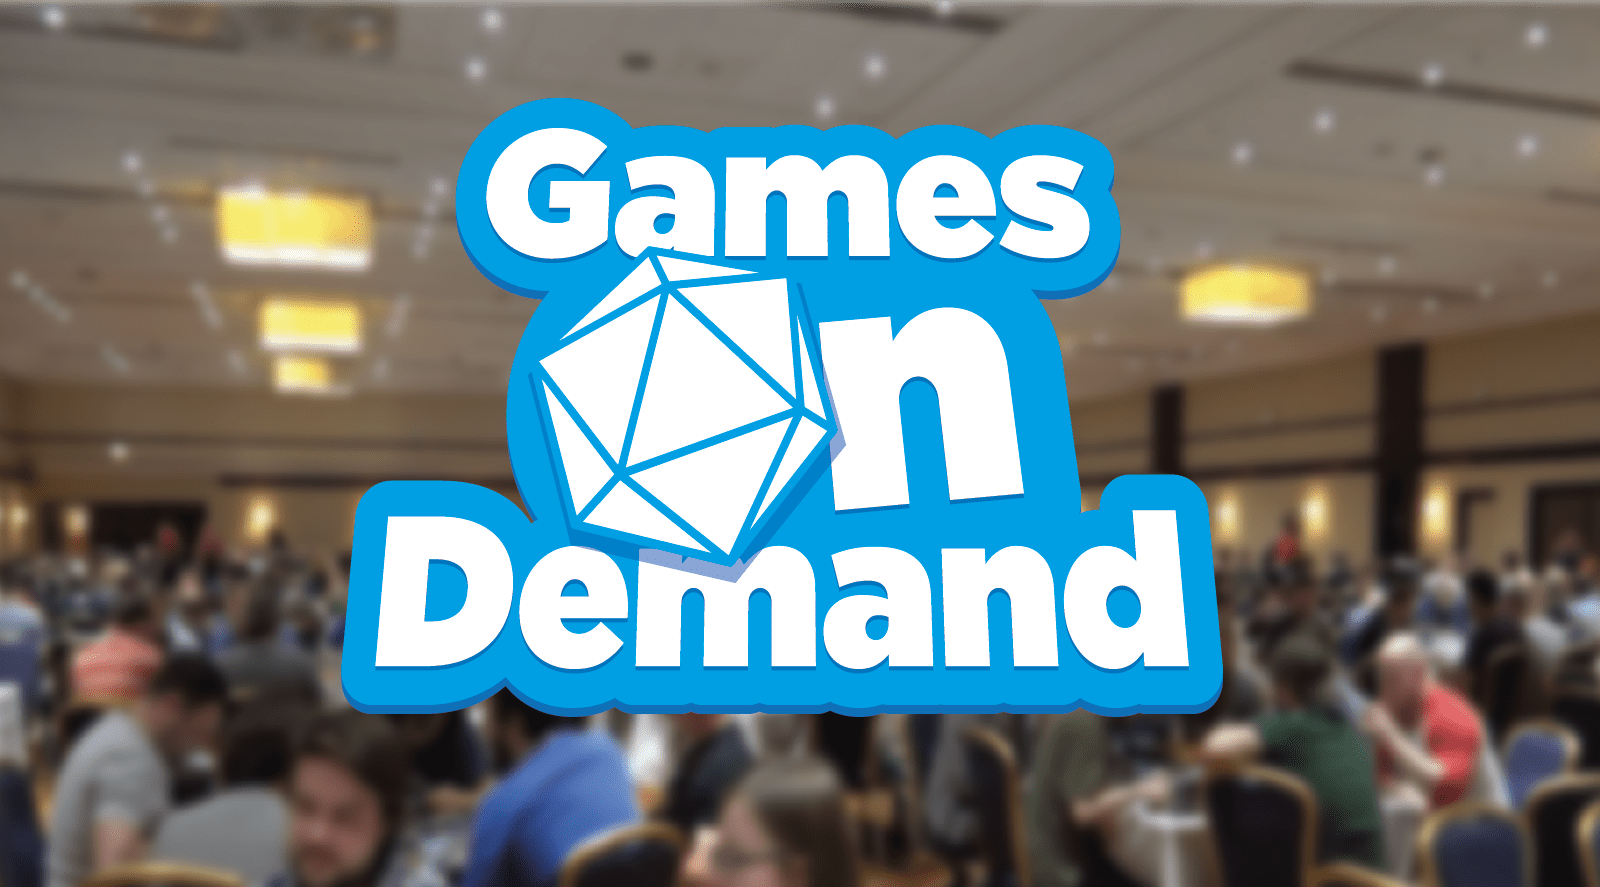 Games on Demand @ UKGE